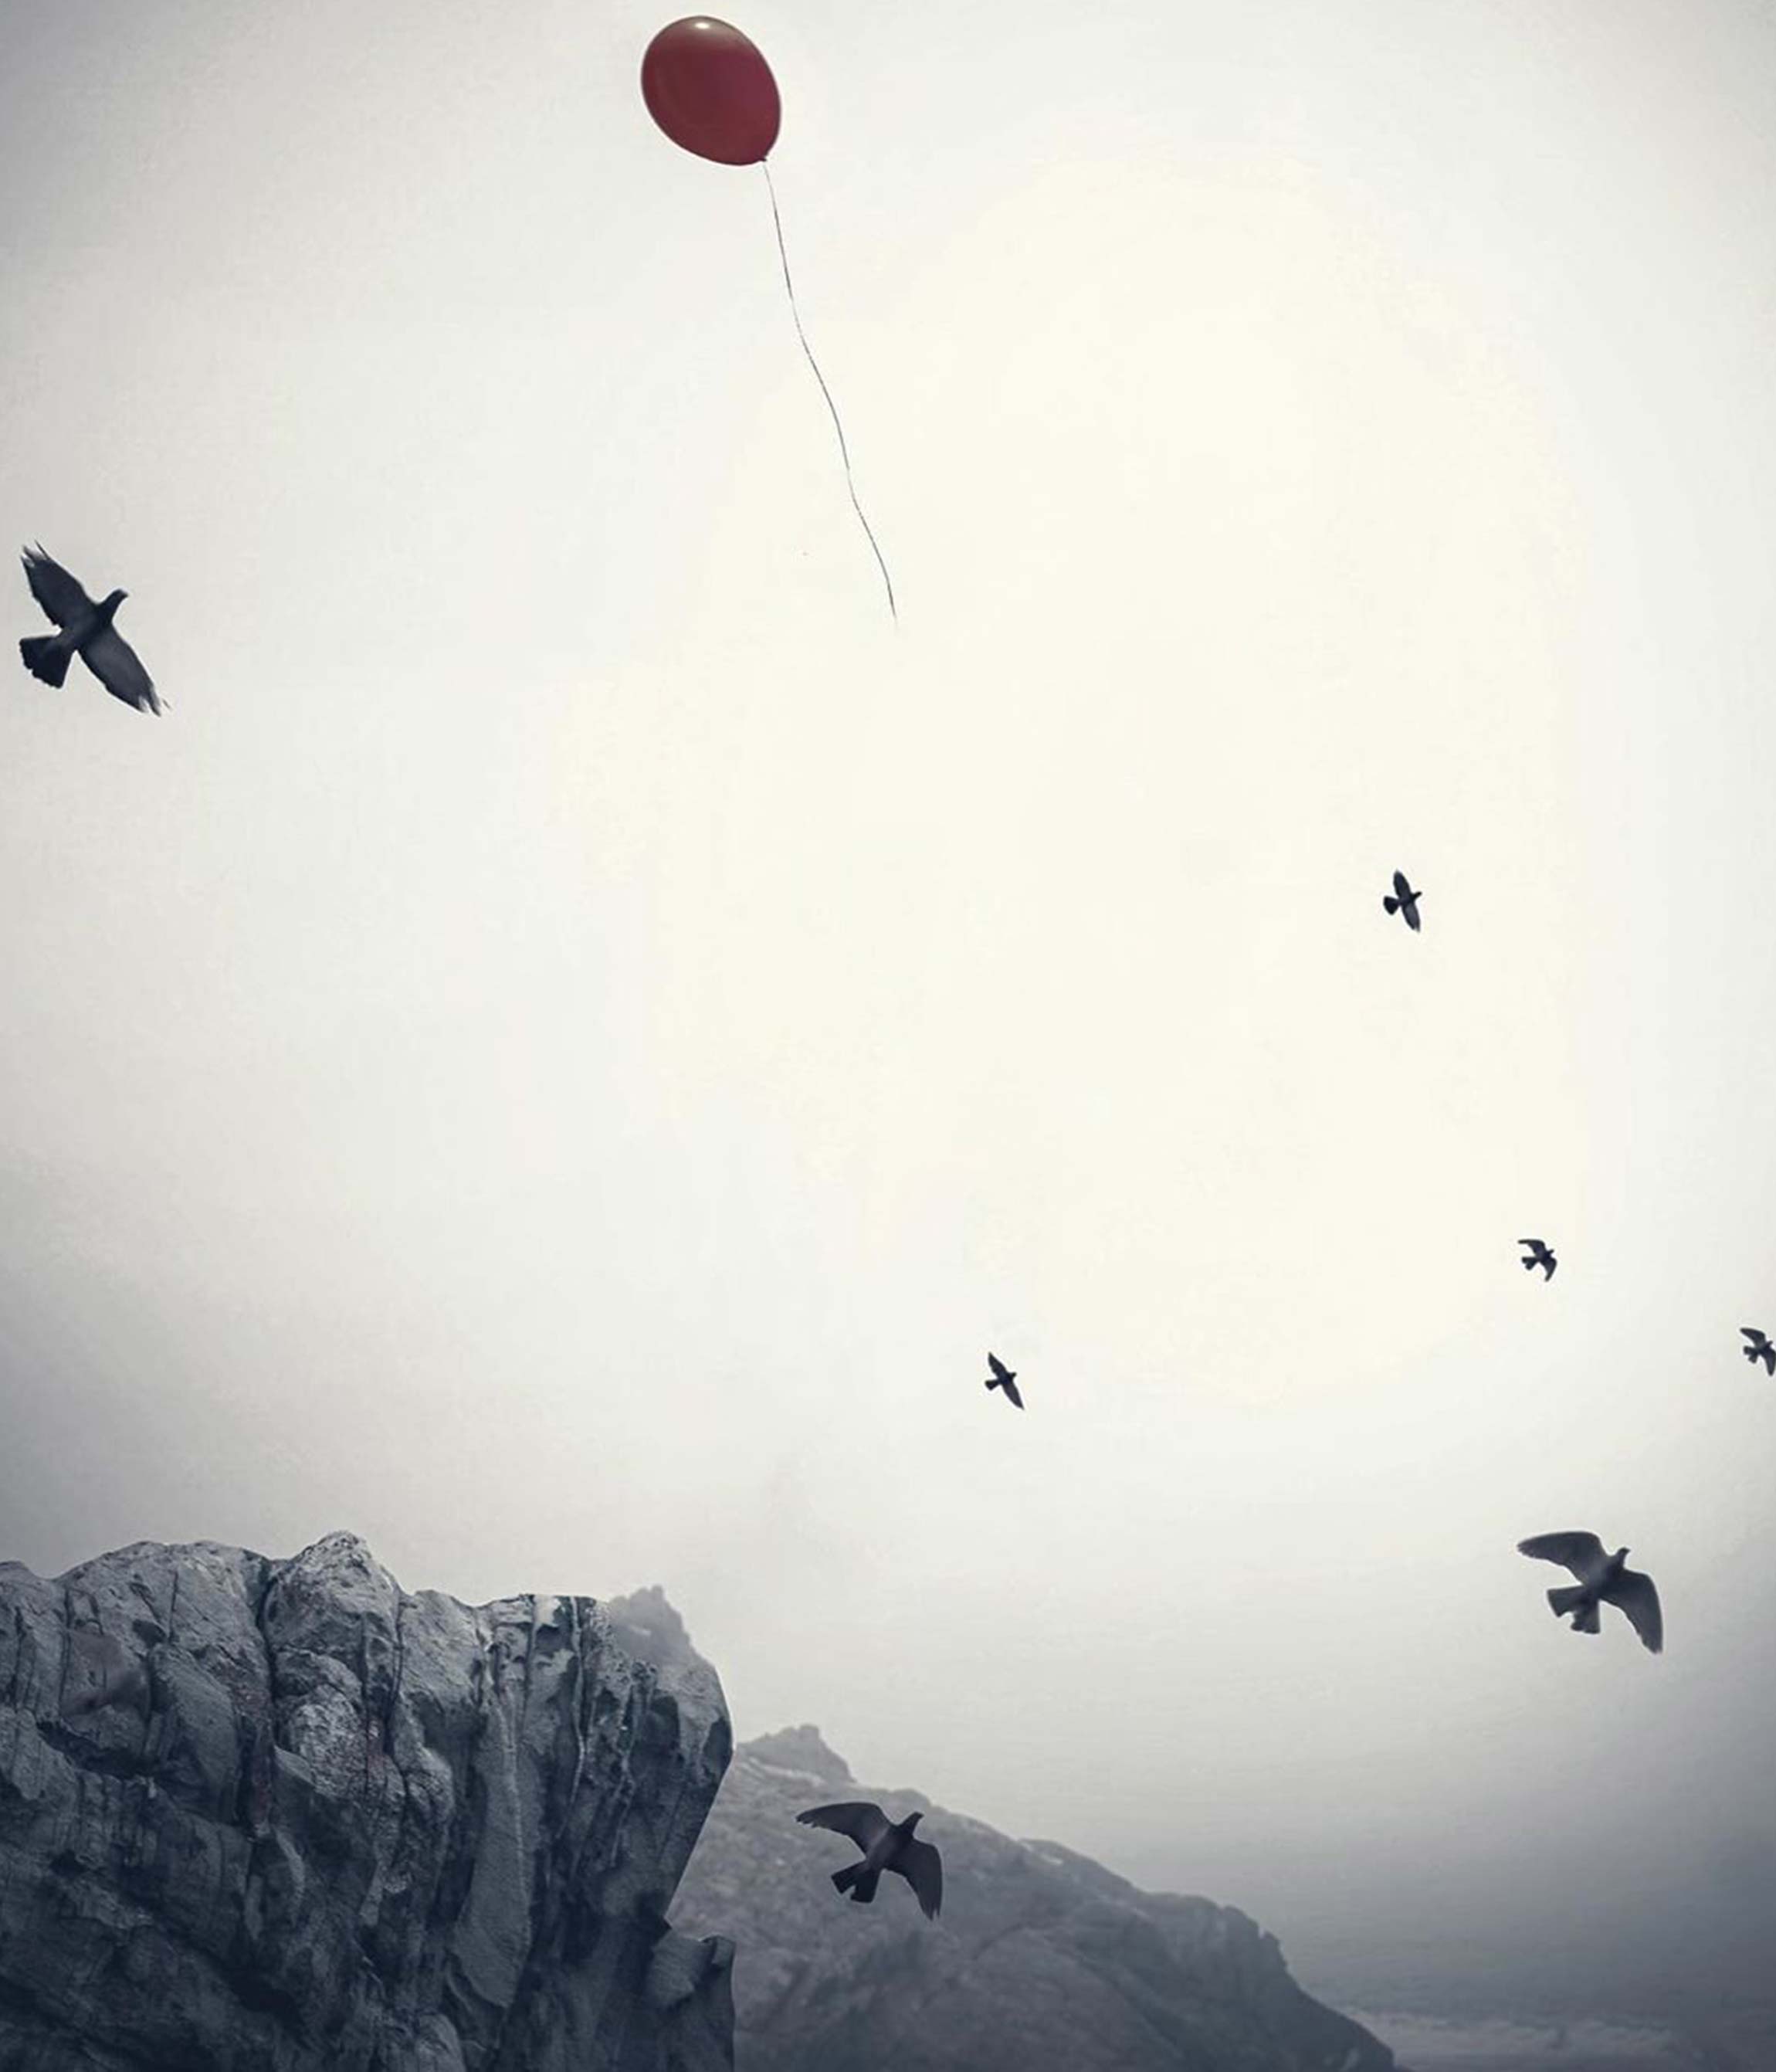 Small Red Balloon Photo Editing Background Full HD